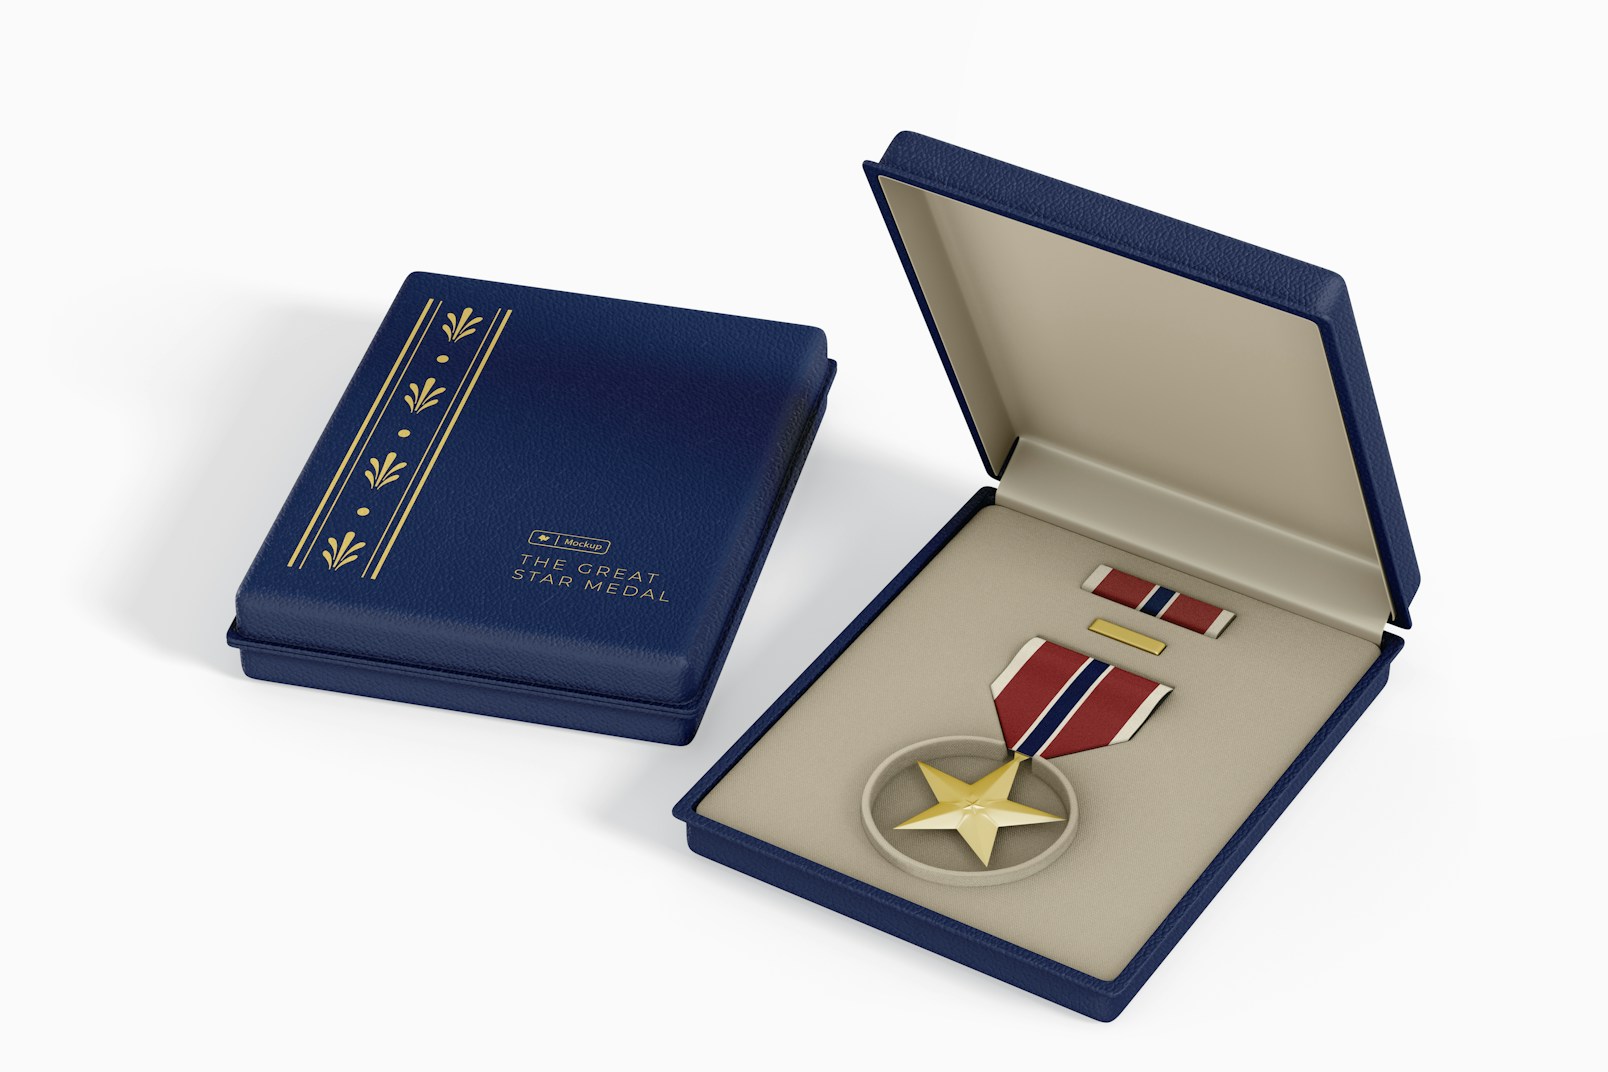 Star Medal with Boxes Mockup, Opened and Closed